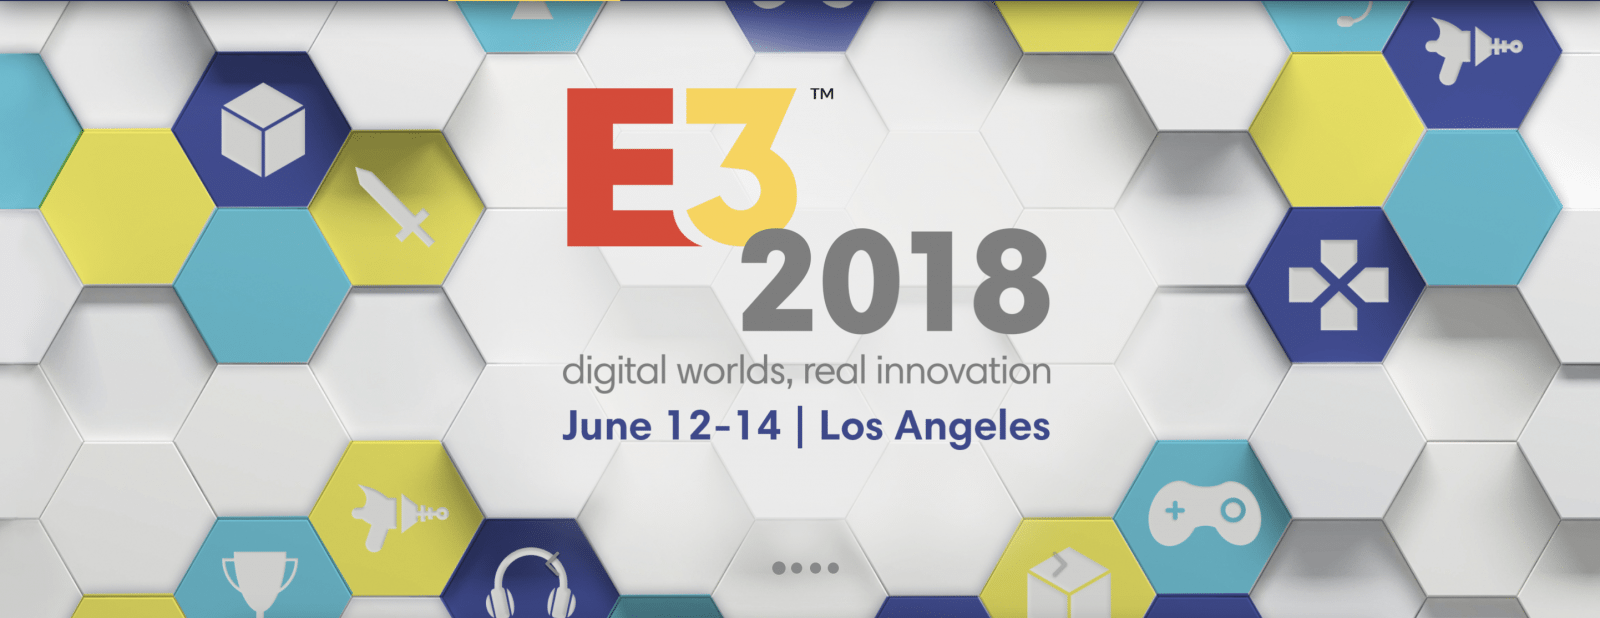 ACS Students Attend E3 2018 Convention